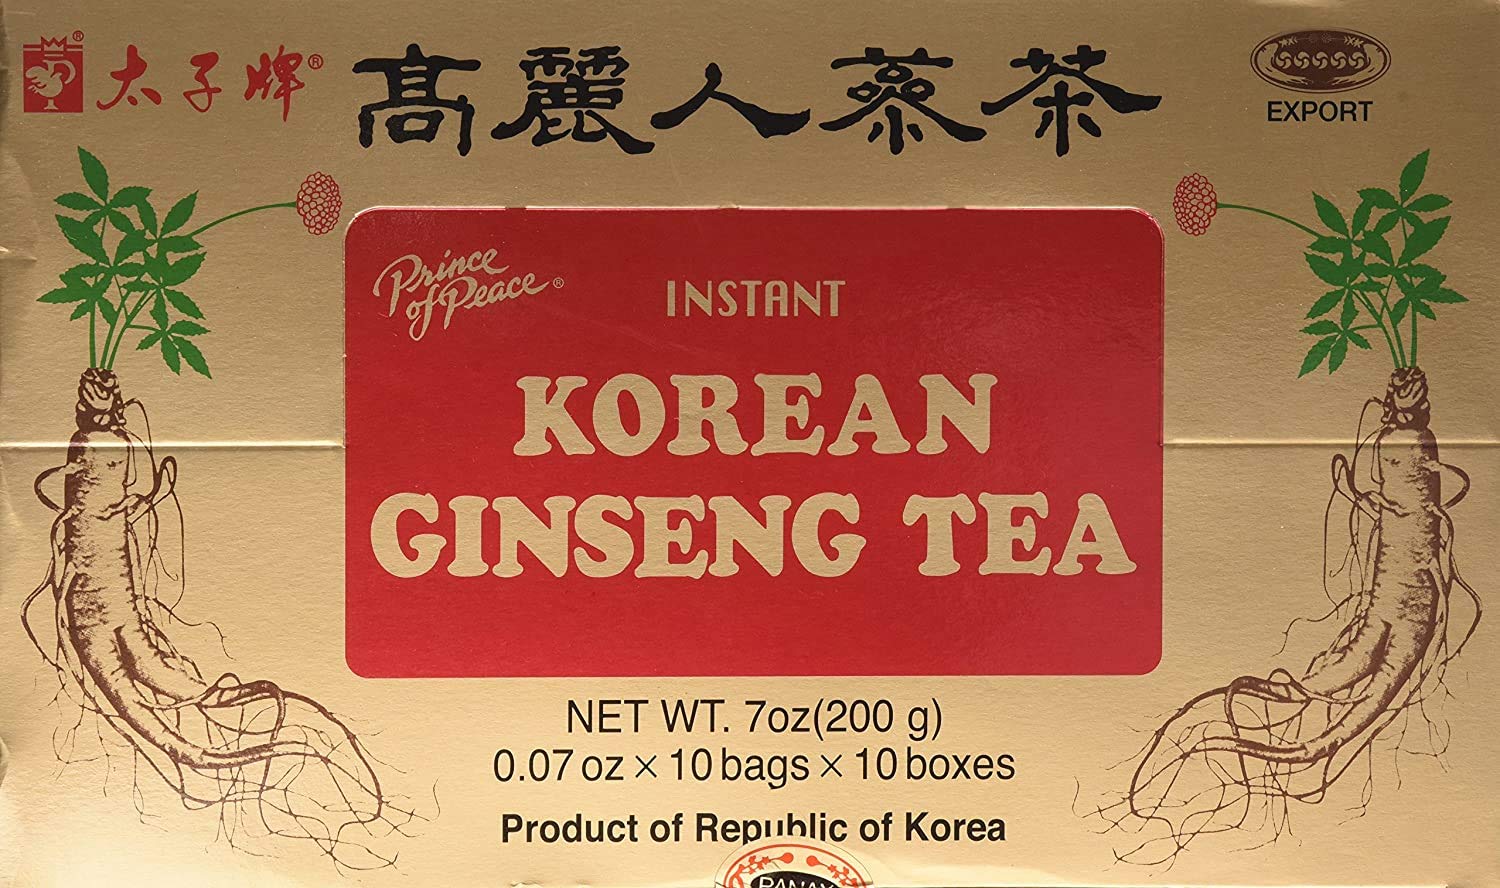 LOVE! LOVE! LOVE! This ginseng tea is basically the extract powder mixed with glucose, its slightly sweet and has a lot of benefits.The only downfall of this drink is its taste (That's why it got 4* in the "taste" rating line). It does takes time getting used to, but it grows on you because of the fact its very good for you!Taking it for over 12 years without missing a single morning in my cup of tea.I found the best way to get used to it's taste is to add it to your favorite drink or morning drink of choice, be it hot or ice tea or coffee, smoothie, soup for that matter... (yes, it does dissolve in ice-cold water), in which case it won't even be noticeable like a separate overpowering taste... but on it's own it resembles the taste of raw beets, if you ever had them... - slightly earthy.Now after all these years I actually miss it in my drink if my hubby forgets to put it (he started using it as well for the last few months and says he can feel the difference), so I go and fix it, because I can feel it's not there, but I am such a believer in this little root, because of my heritage and where it grows. This particular kind of ginseng  actually grows in my native city, but it's forbidden to harvest as it's considered as one of the indangered species.For me the major benefits of this drink are:Energy- my hubby says if he doesn't take it first thing in a morning, he can feel he is not getting on the same energy level as with it.Weightloss (even though I am skin and bones, it helps me to stay in shape - it increases the speed of you metabolism, so you digest your calories faster and it helps to push out all extra out of your system.It's good for a lot of things and you can read the "benefits and side effects (which it doesn't have, unless you have heart problems)" and makes your day brighter and happier!I sm sticking with this one for the lifetime. That's the thing- if you started it, do not stop, unless you are allergic or it causes something in your body which you don't wish for....  this is the only one ginseng in the whole list of species which doesn't have any major side effects and is mild. If you want something stronger, you need to go to an Asian store and ask for something else.And price is right!